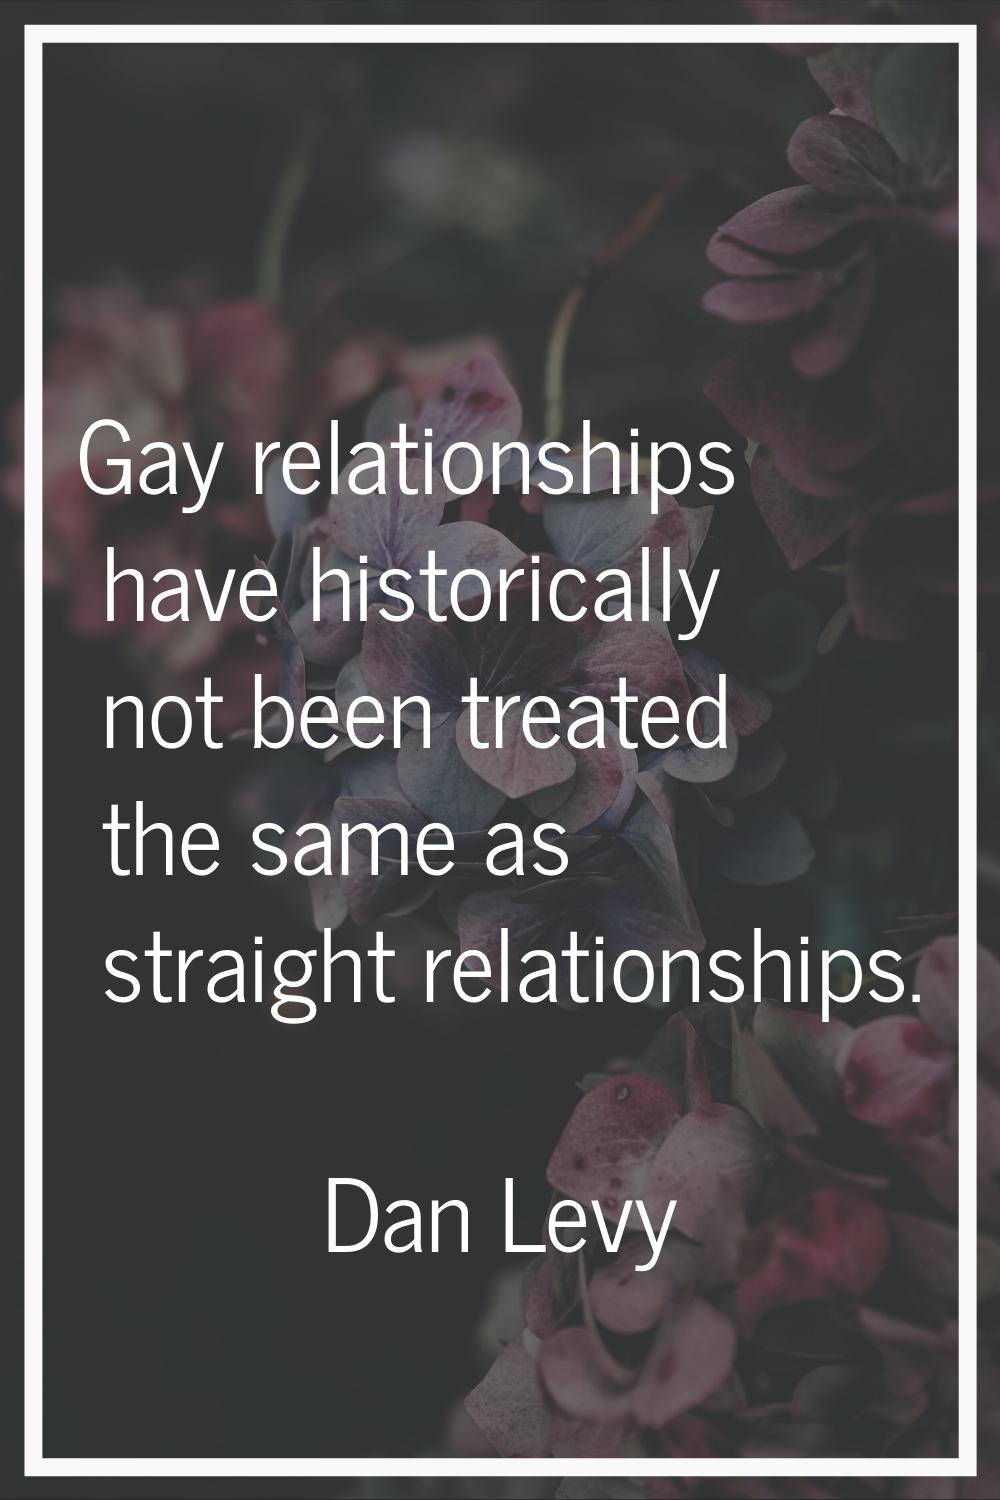 Gay relationships have historically not been treated the same as straight relationships.